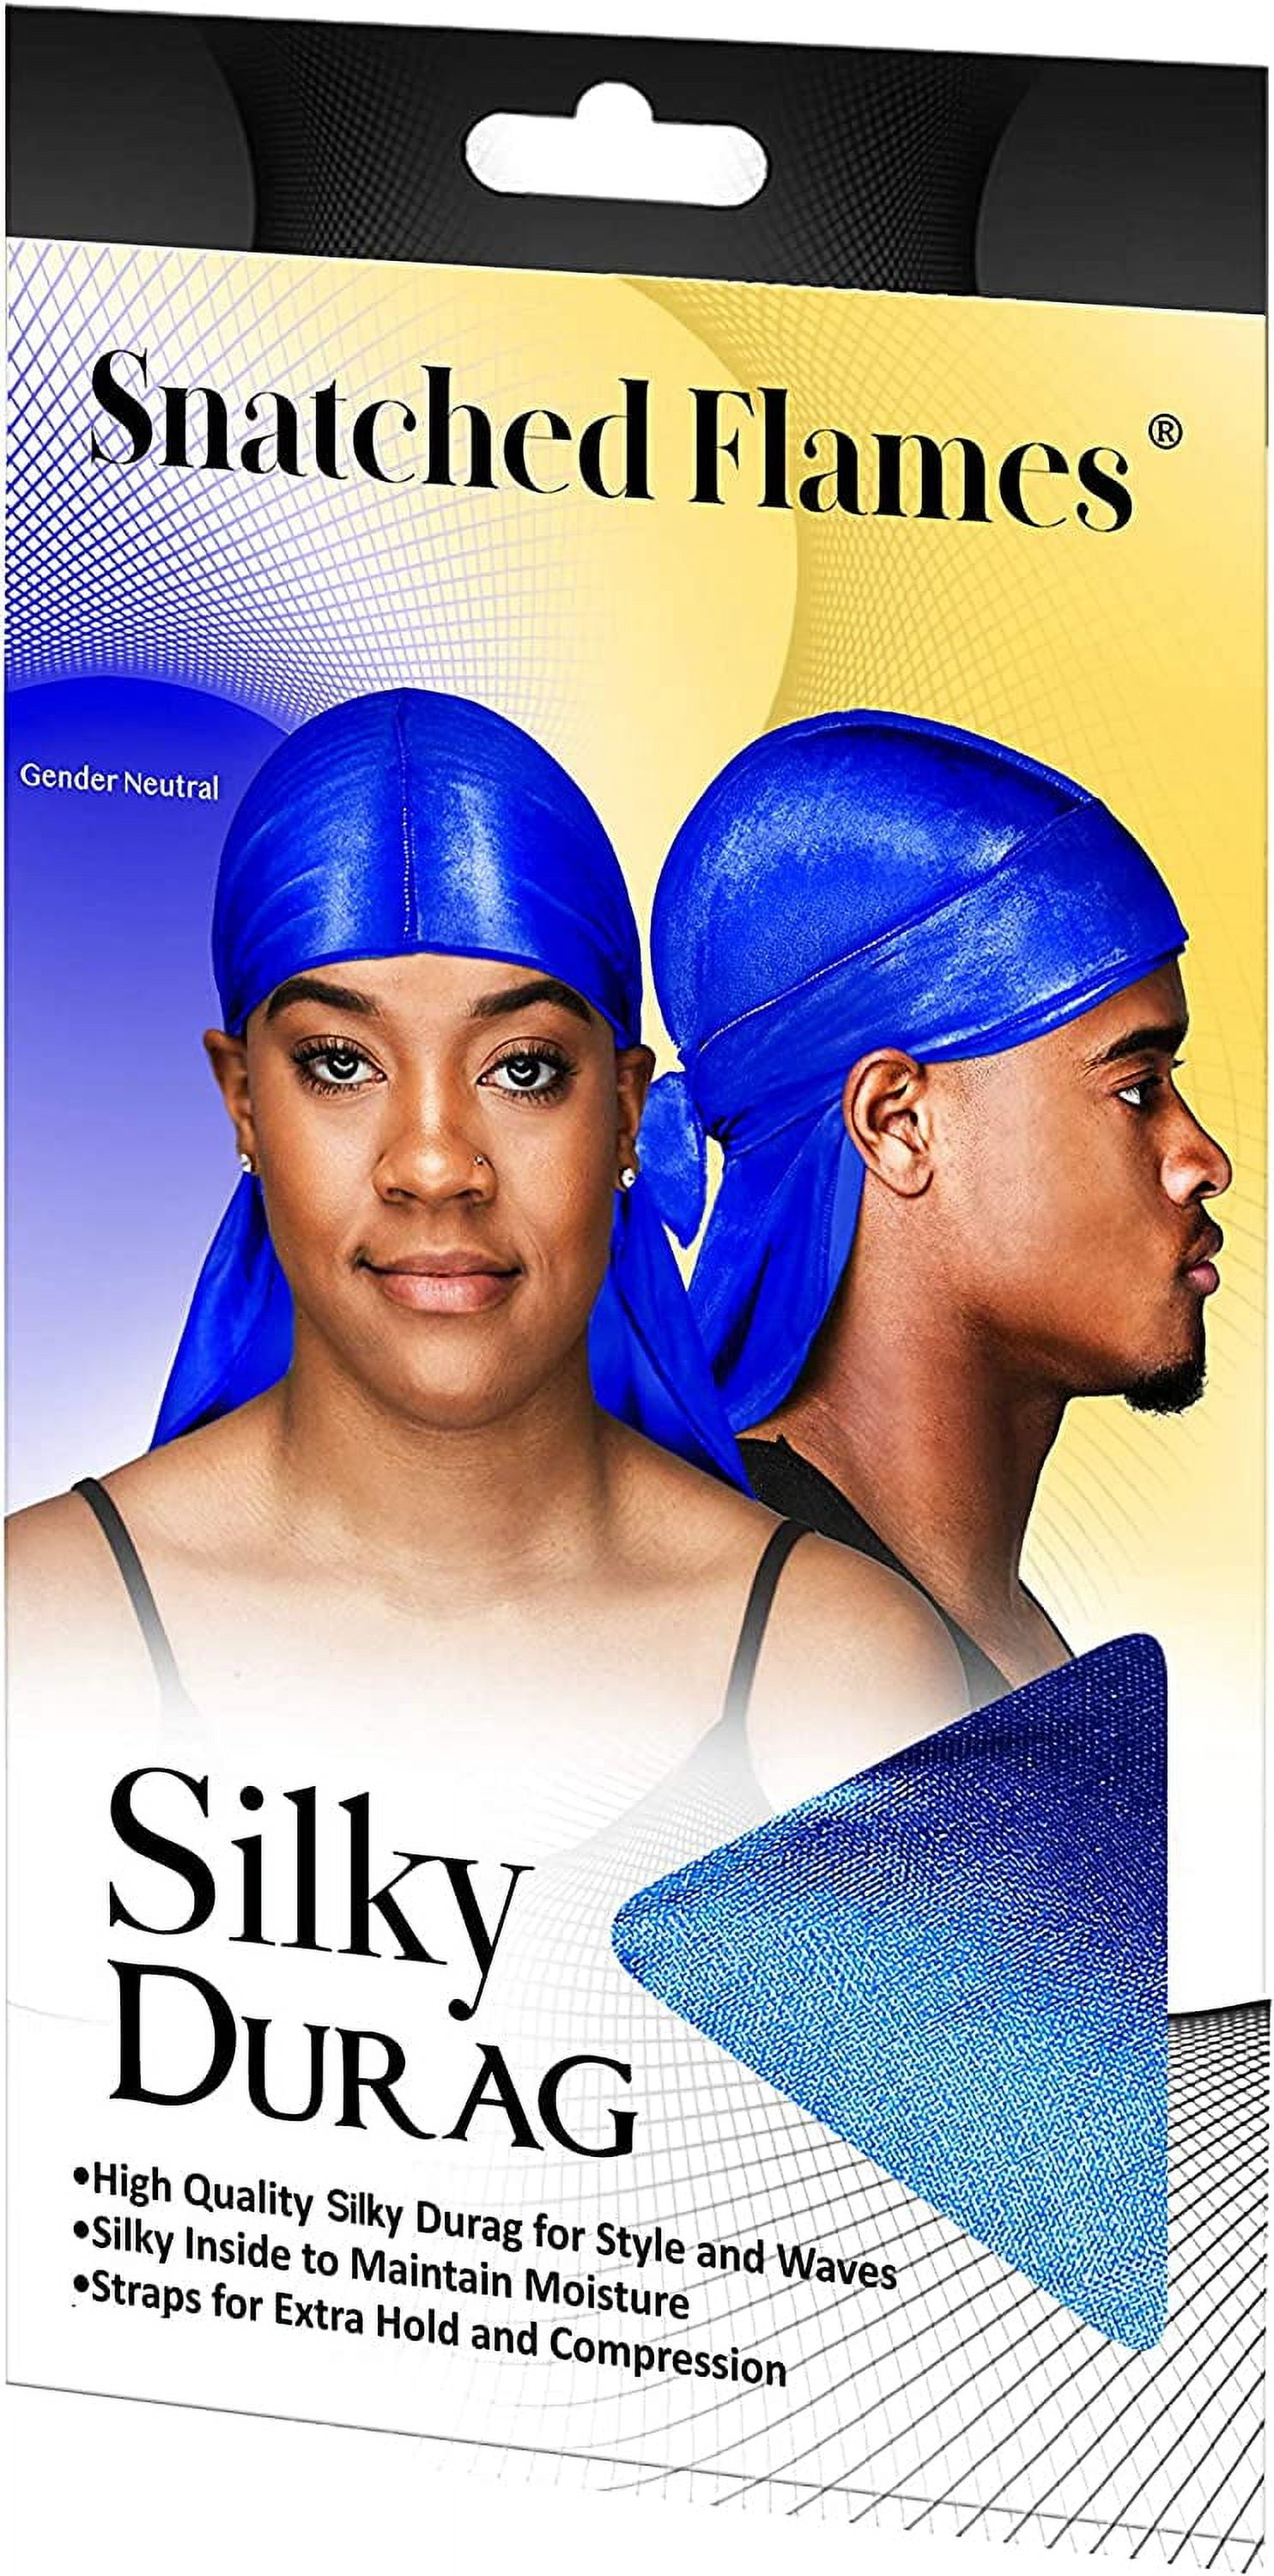 5 Reasons You Should Wear a Du-rag durags durag 360 wavers – Snatched Flames